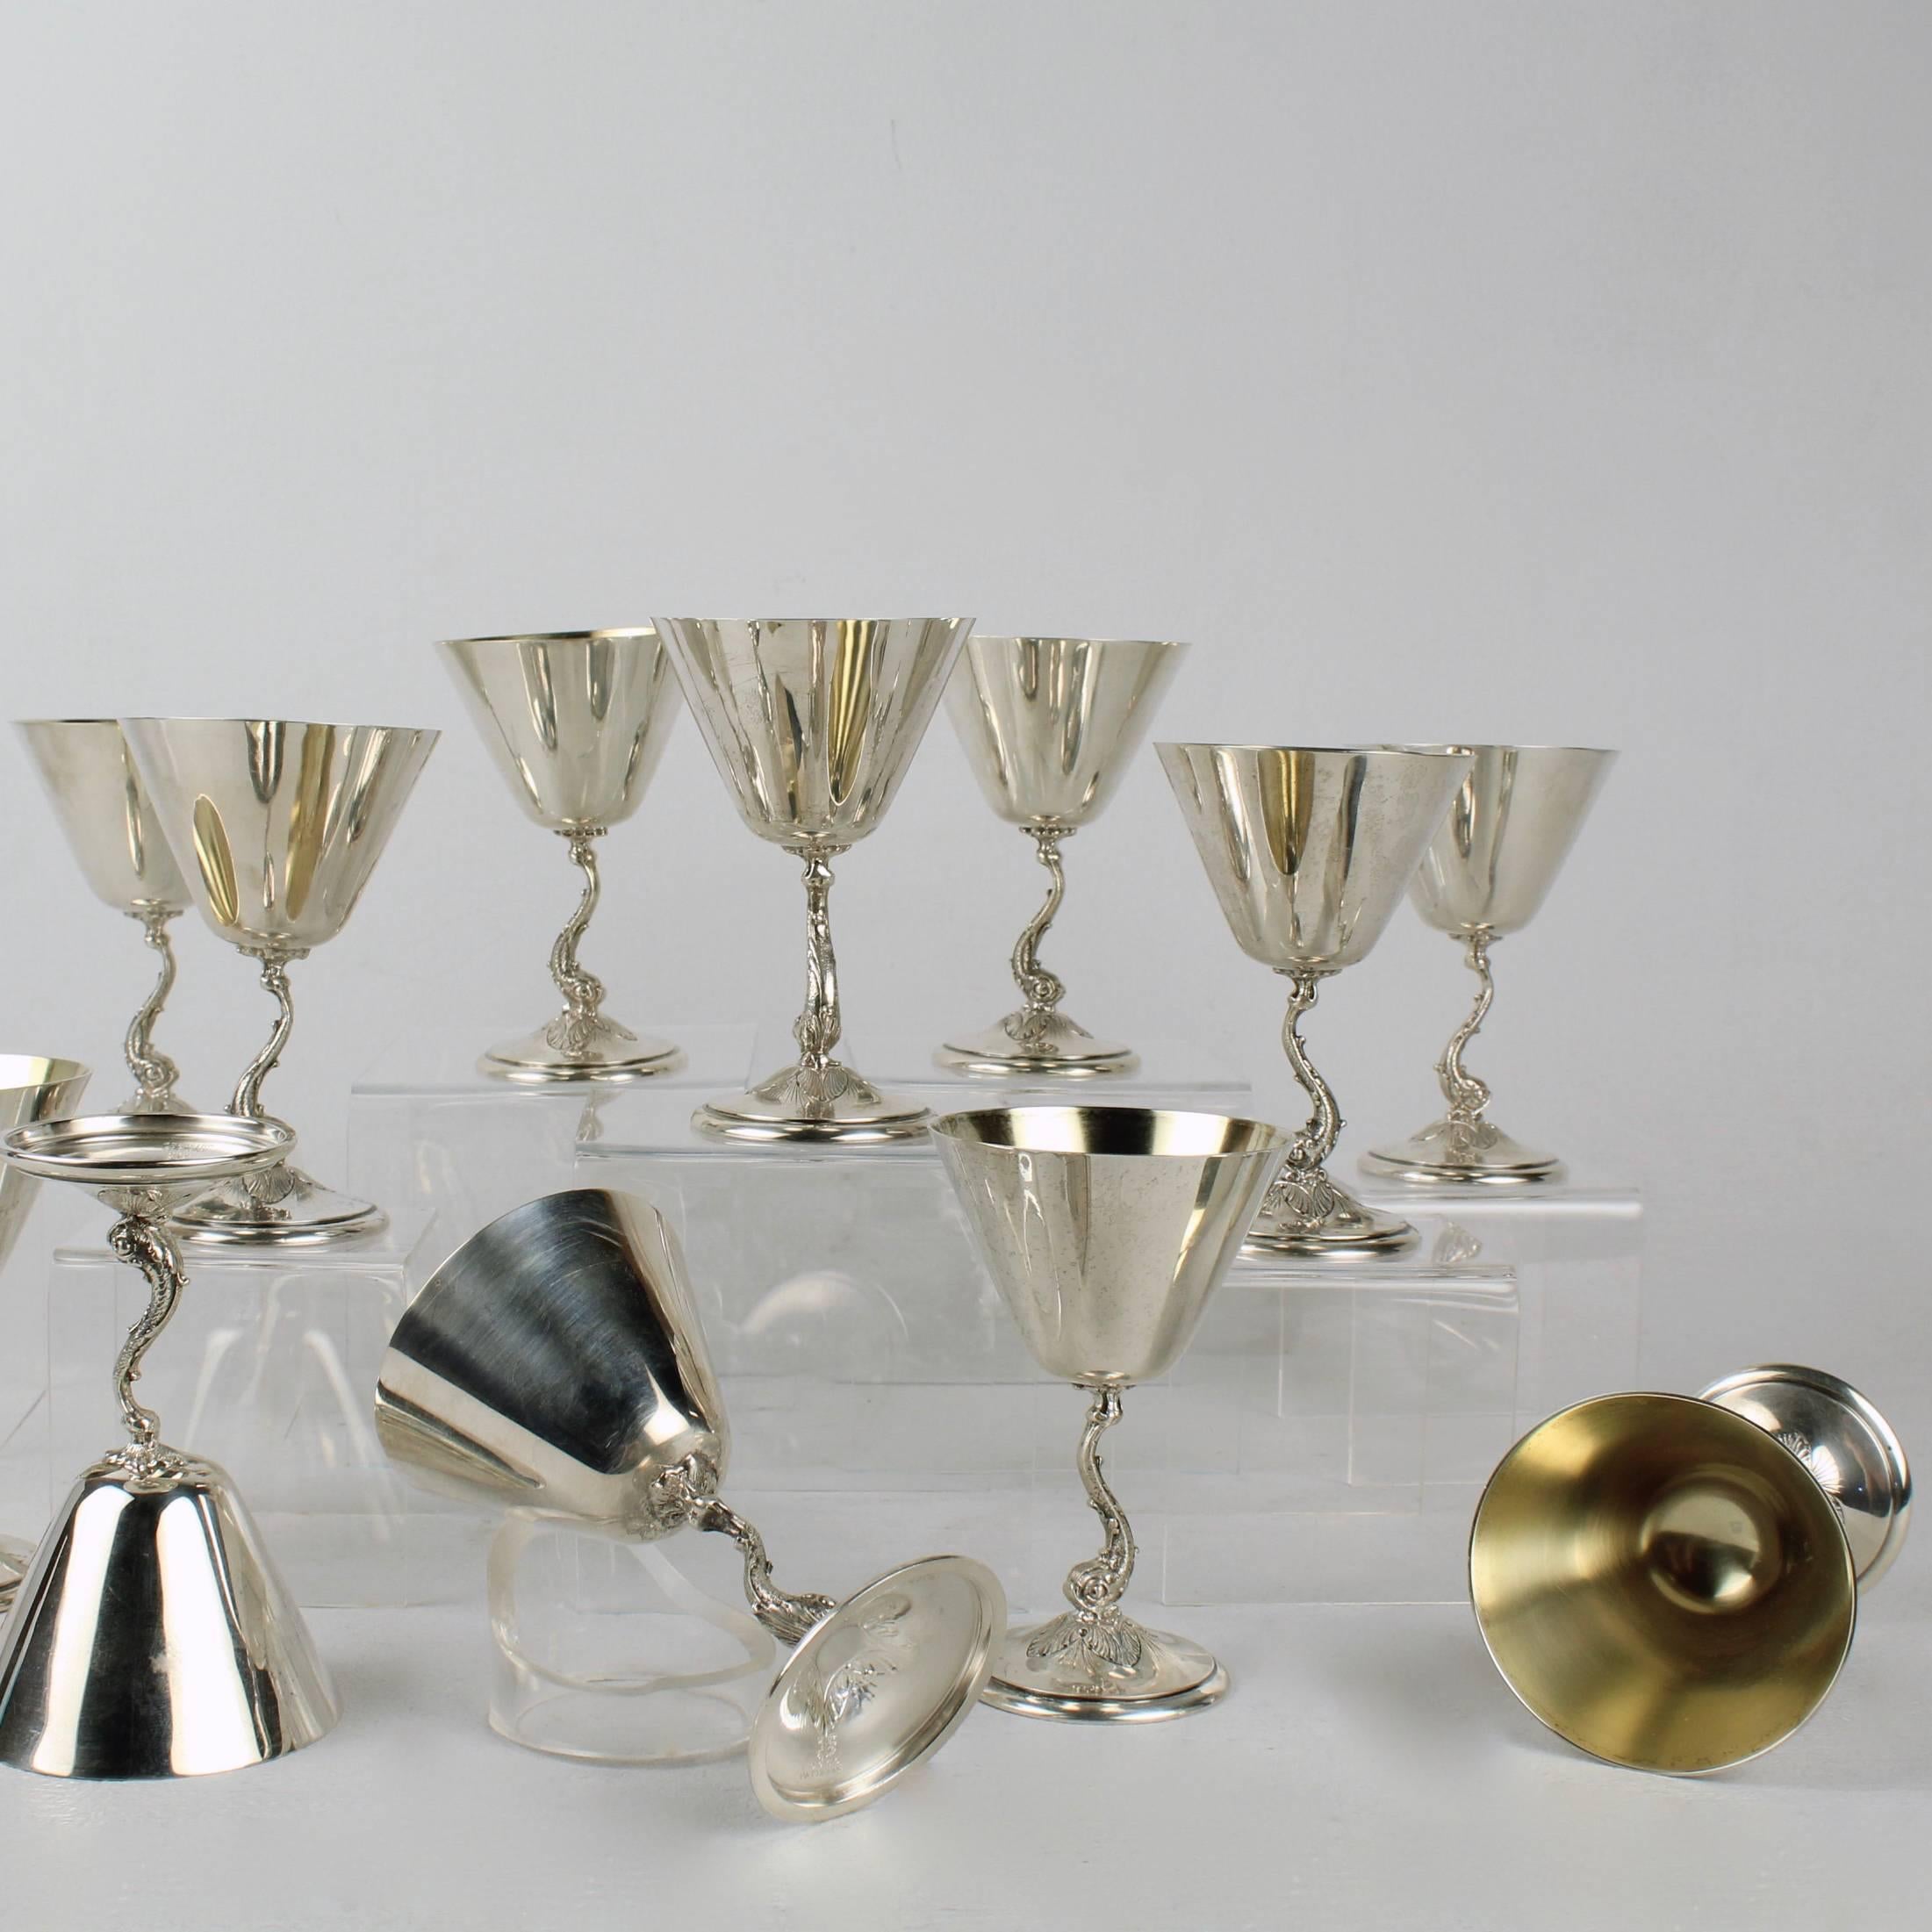 12 Gorham Art Deco Sterling Silver Dolphin Martini Goblets or Cocktail Stems 4